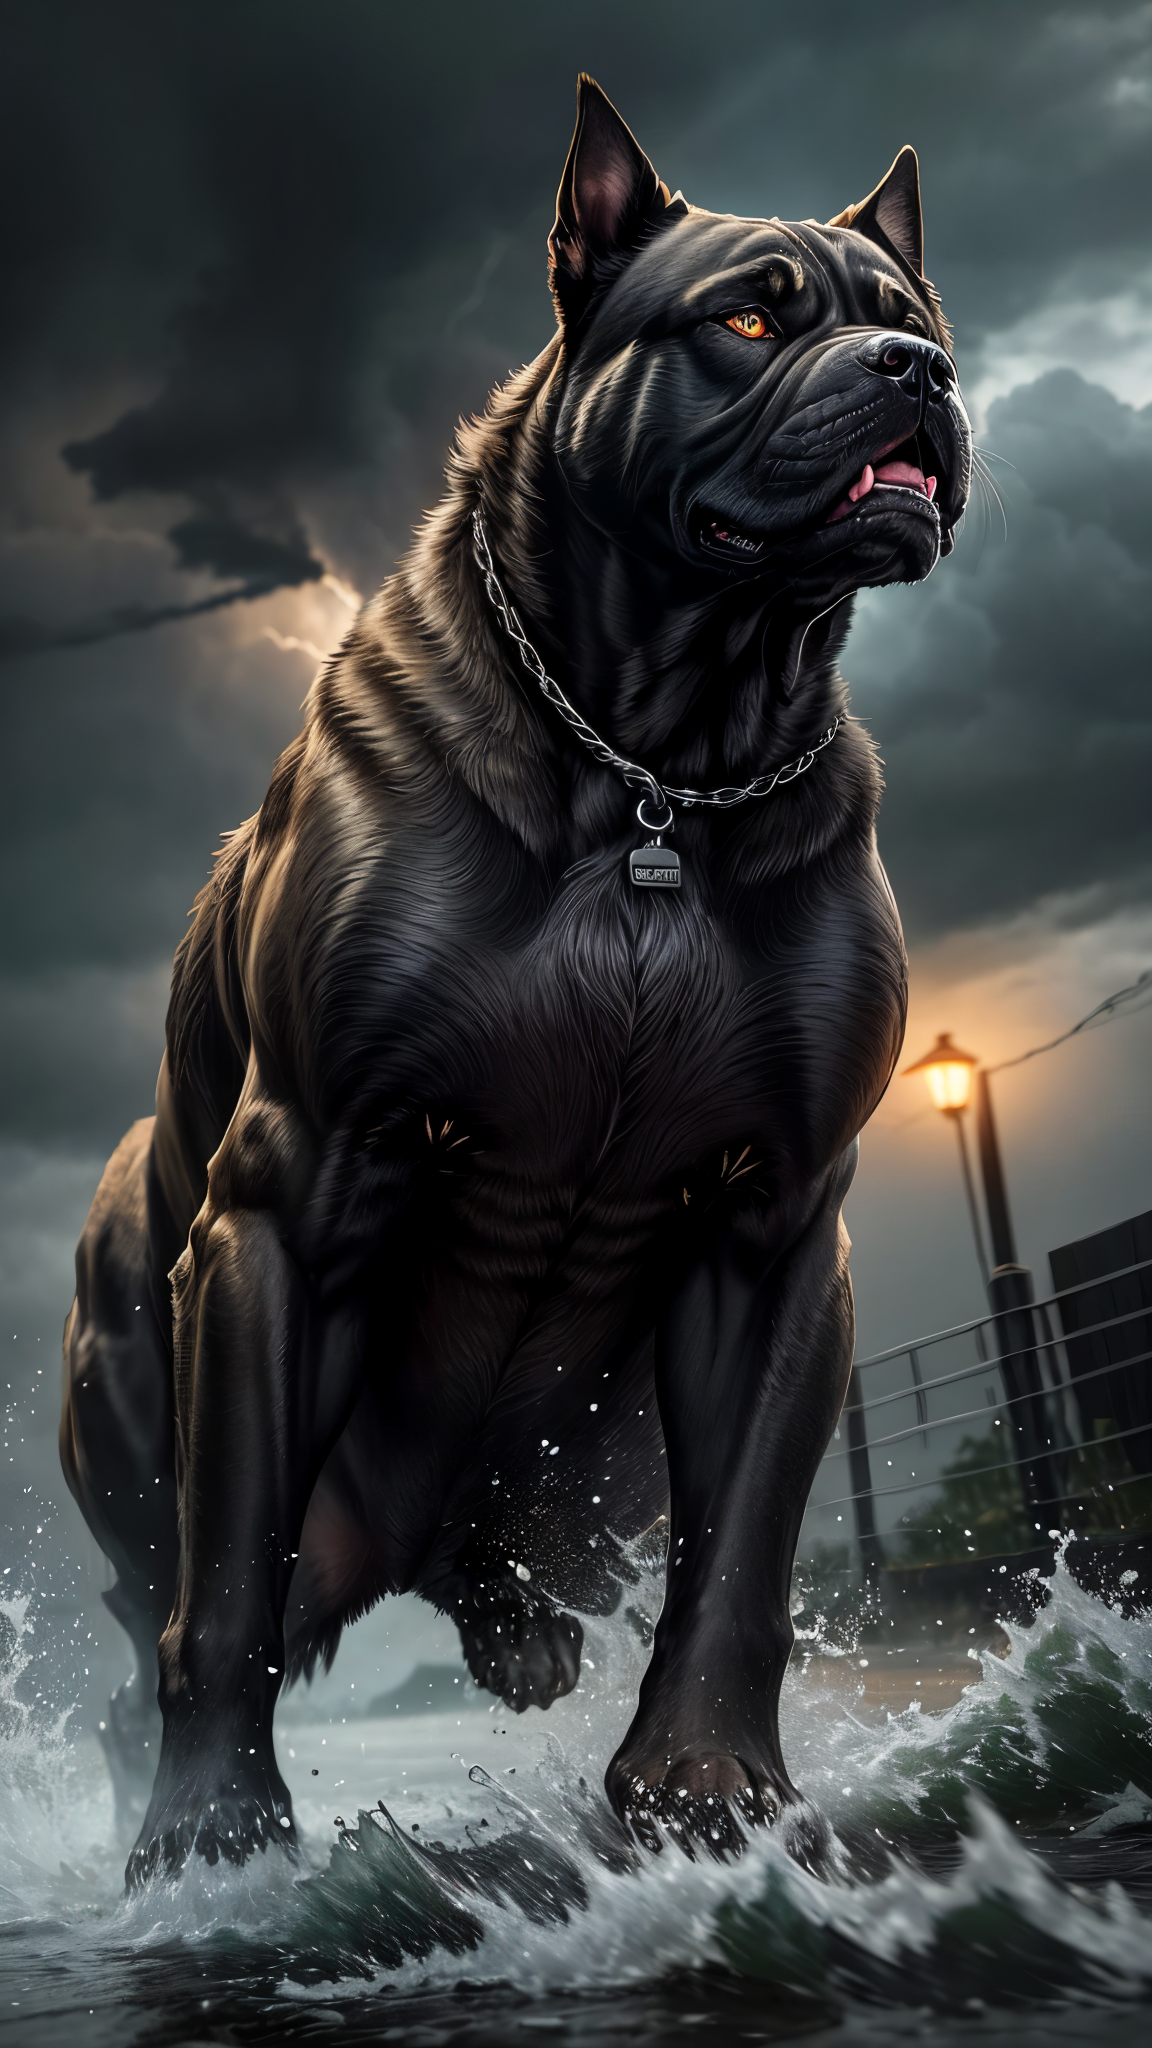 A fiercely snarling Cane Corso, its fur bristling with aggression, lightning crackling in the stormy background. This striking image captures the raw power and intensity of the canine in a photograph. The pitbull's fiery gaze and bared teeth convey a sense of danger and ferocity, while the dramatic setting adds an ominous atmosphere. The details are crisp and vivid, showcasing the quality of the composition and the artistry behind it. Viewer's attention is drawn to the dynamic contrast between the dog's menacing demeanor and the tumultuous weather, creating a visually compelling scene.